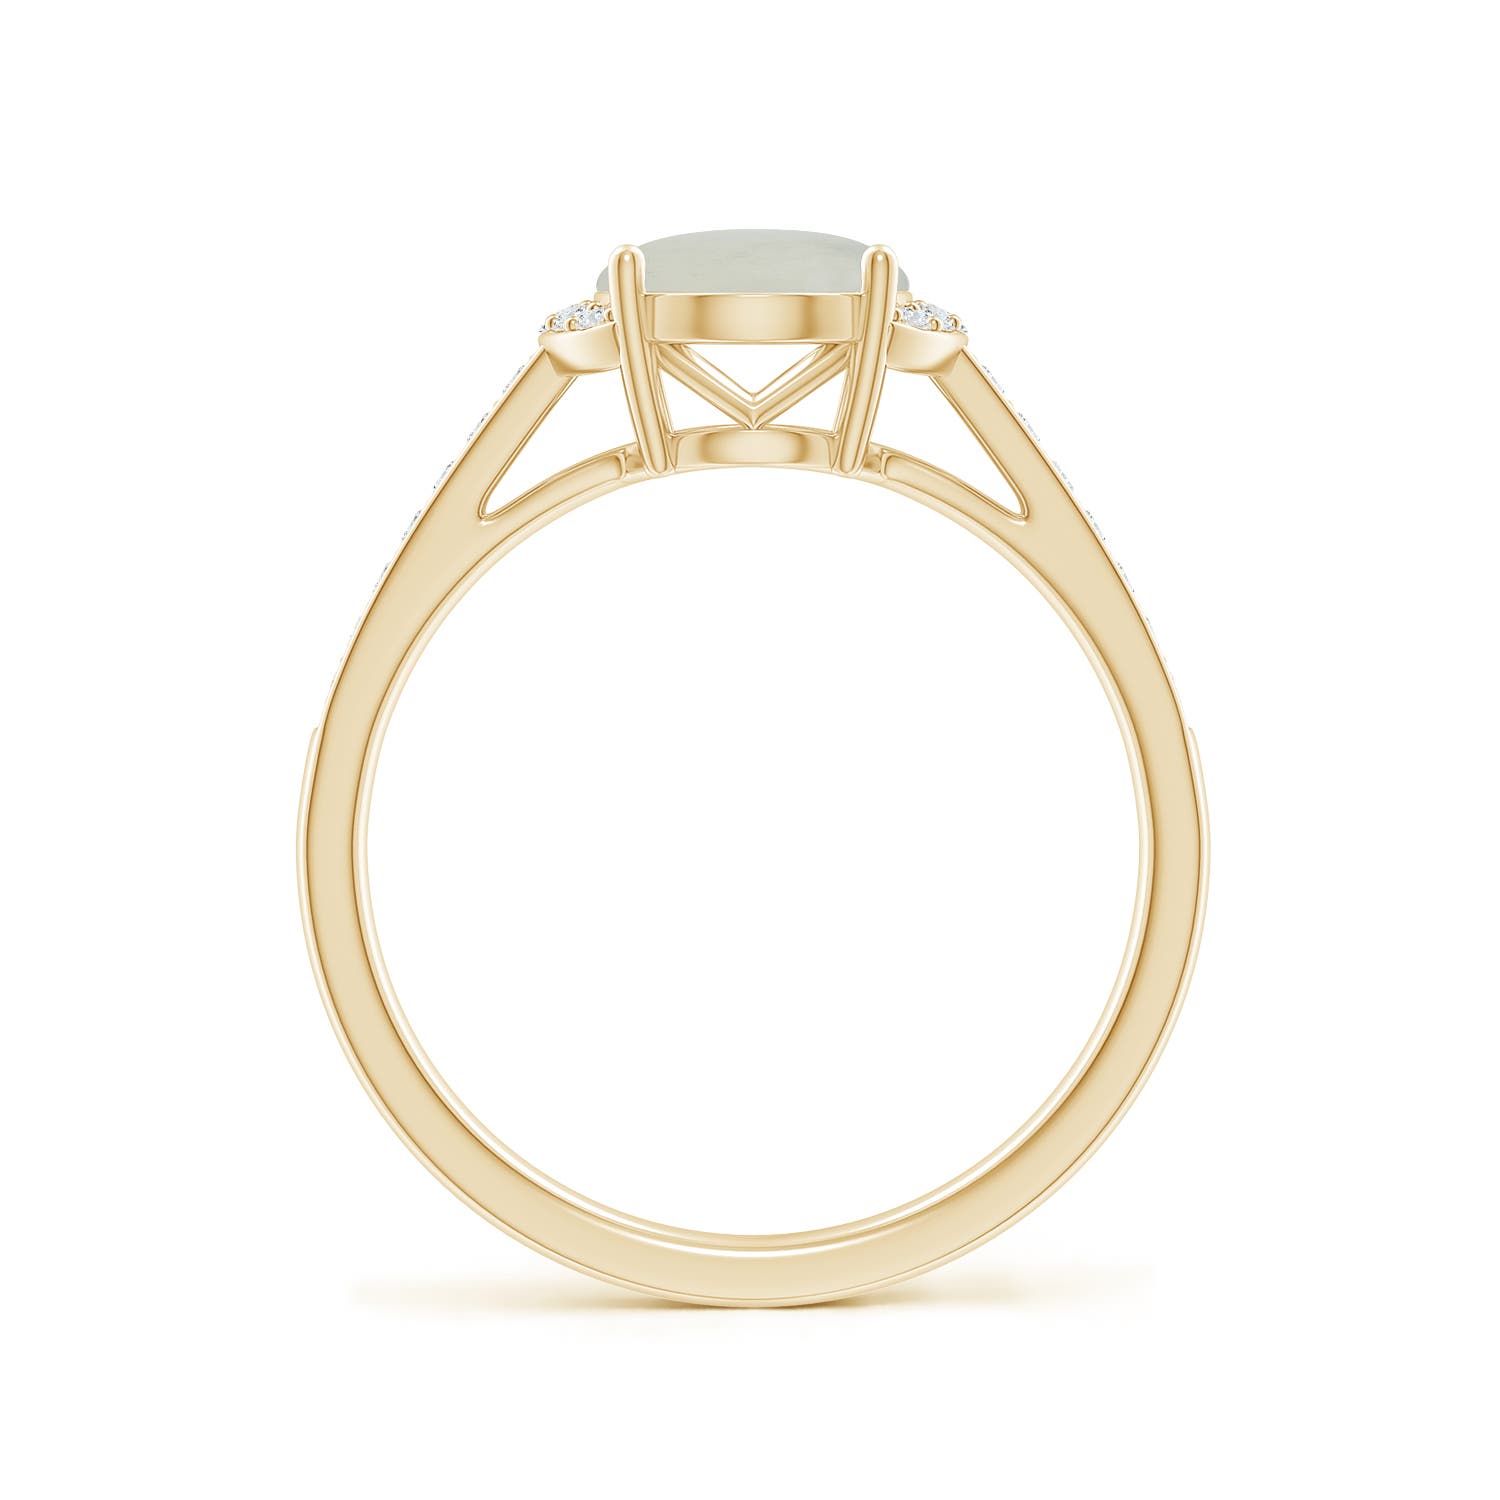 A - Moonstone / 1.88 CT / 14 KT Yellow Gold